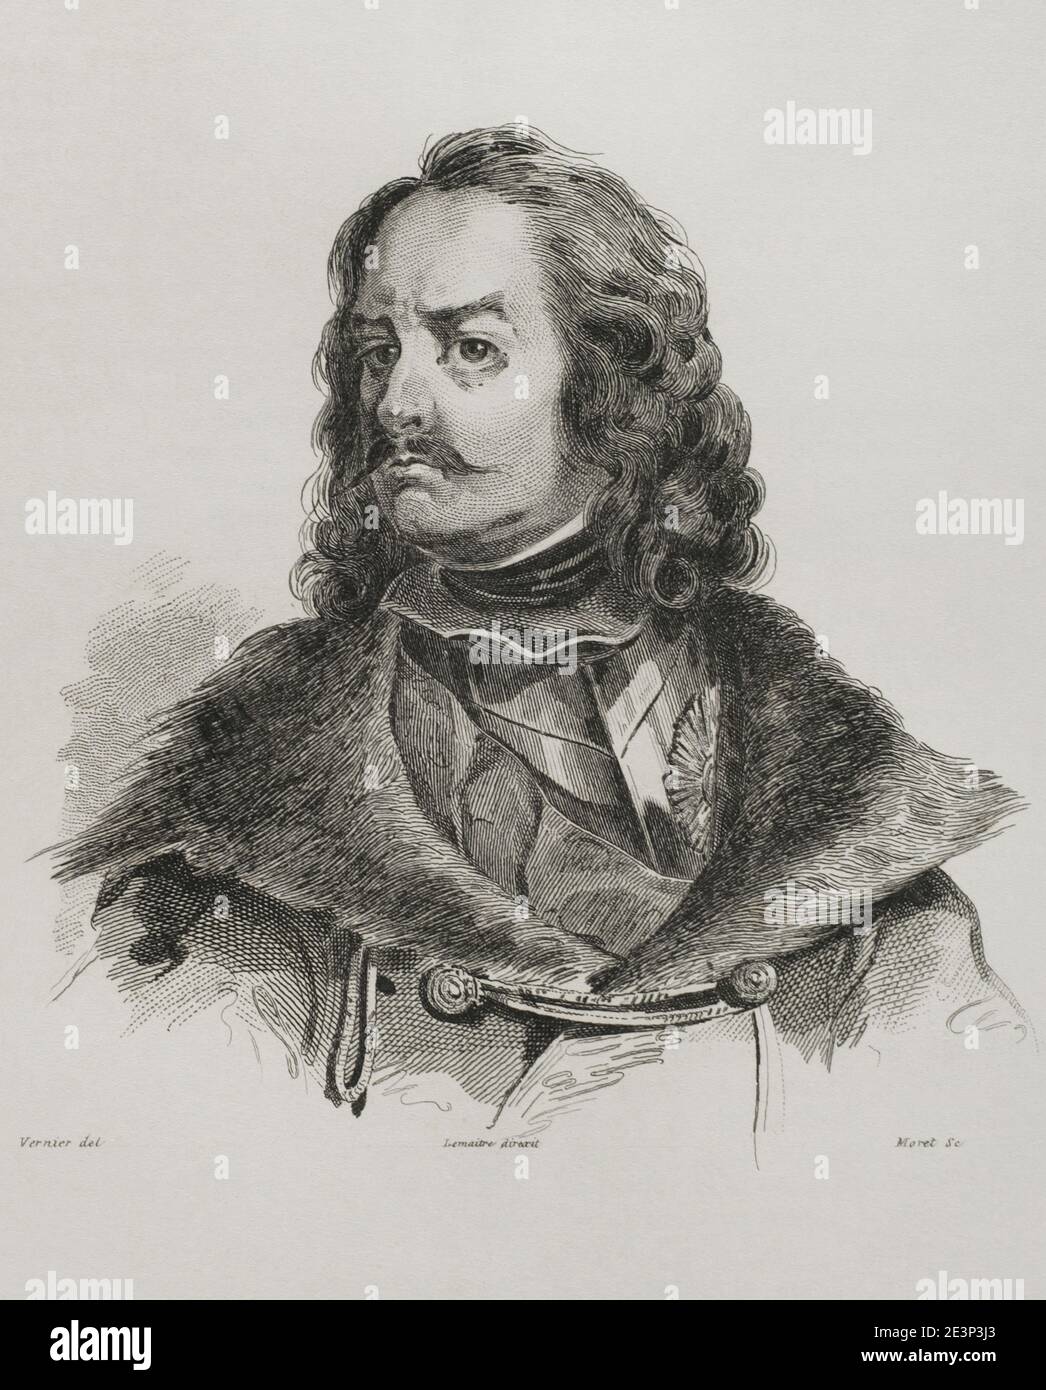 Peter I, byname Peter the Great, Russian in full Pyotr Alekseyevich (1672-1725). Tsar and Emperor of al the Russias. Potrait. Engraving by Lemaitre, Vernier and Moret. History of Russia by Jean Marie Chopin (1796-1870). Panorama Universal, Spanish edition, 1839. Stock Photo